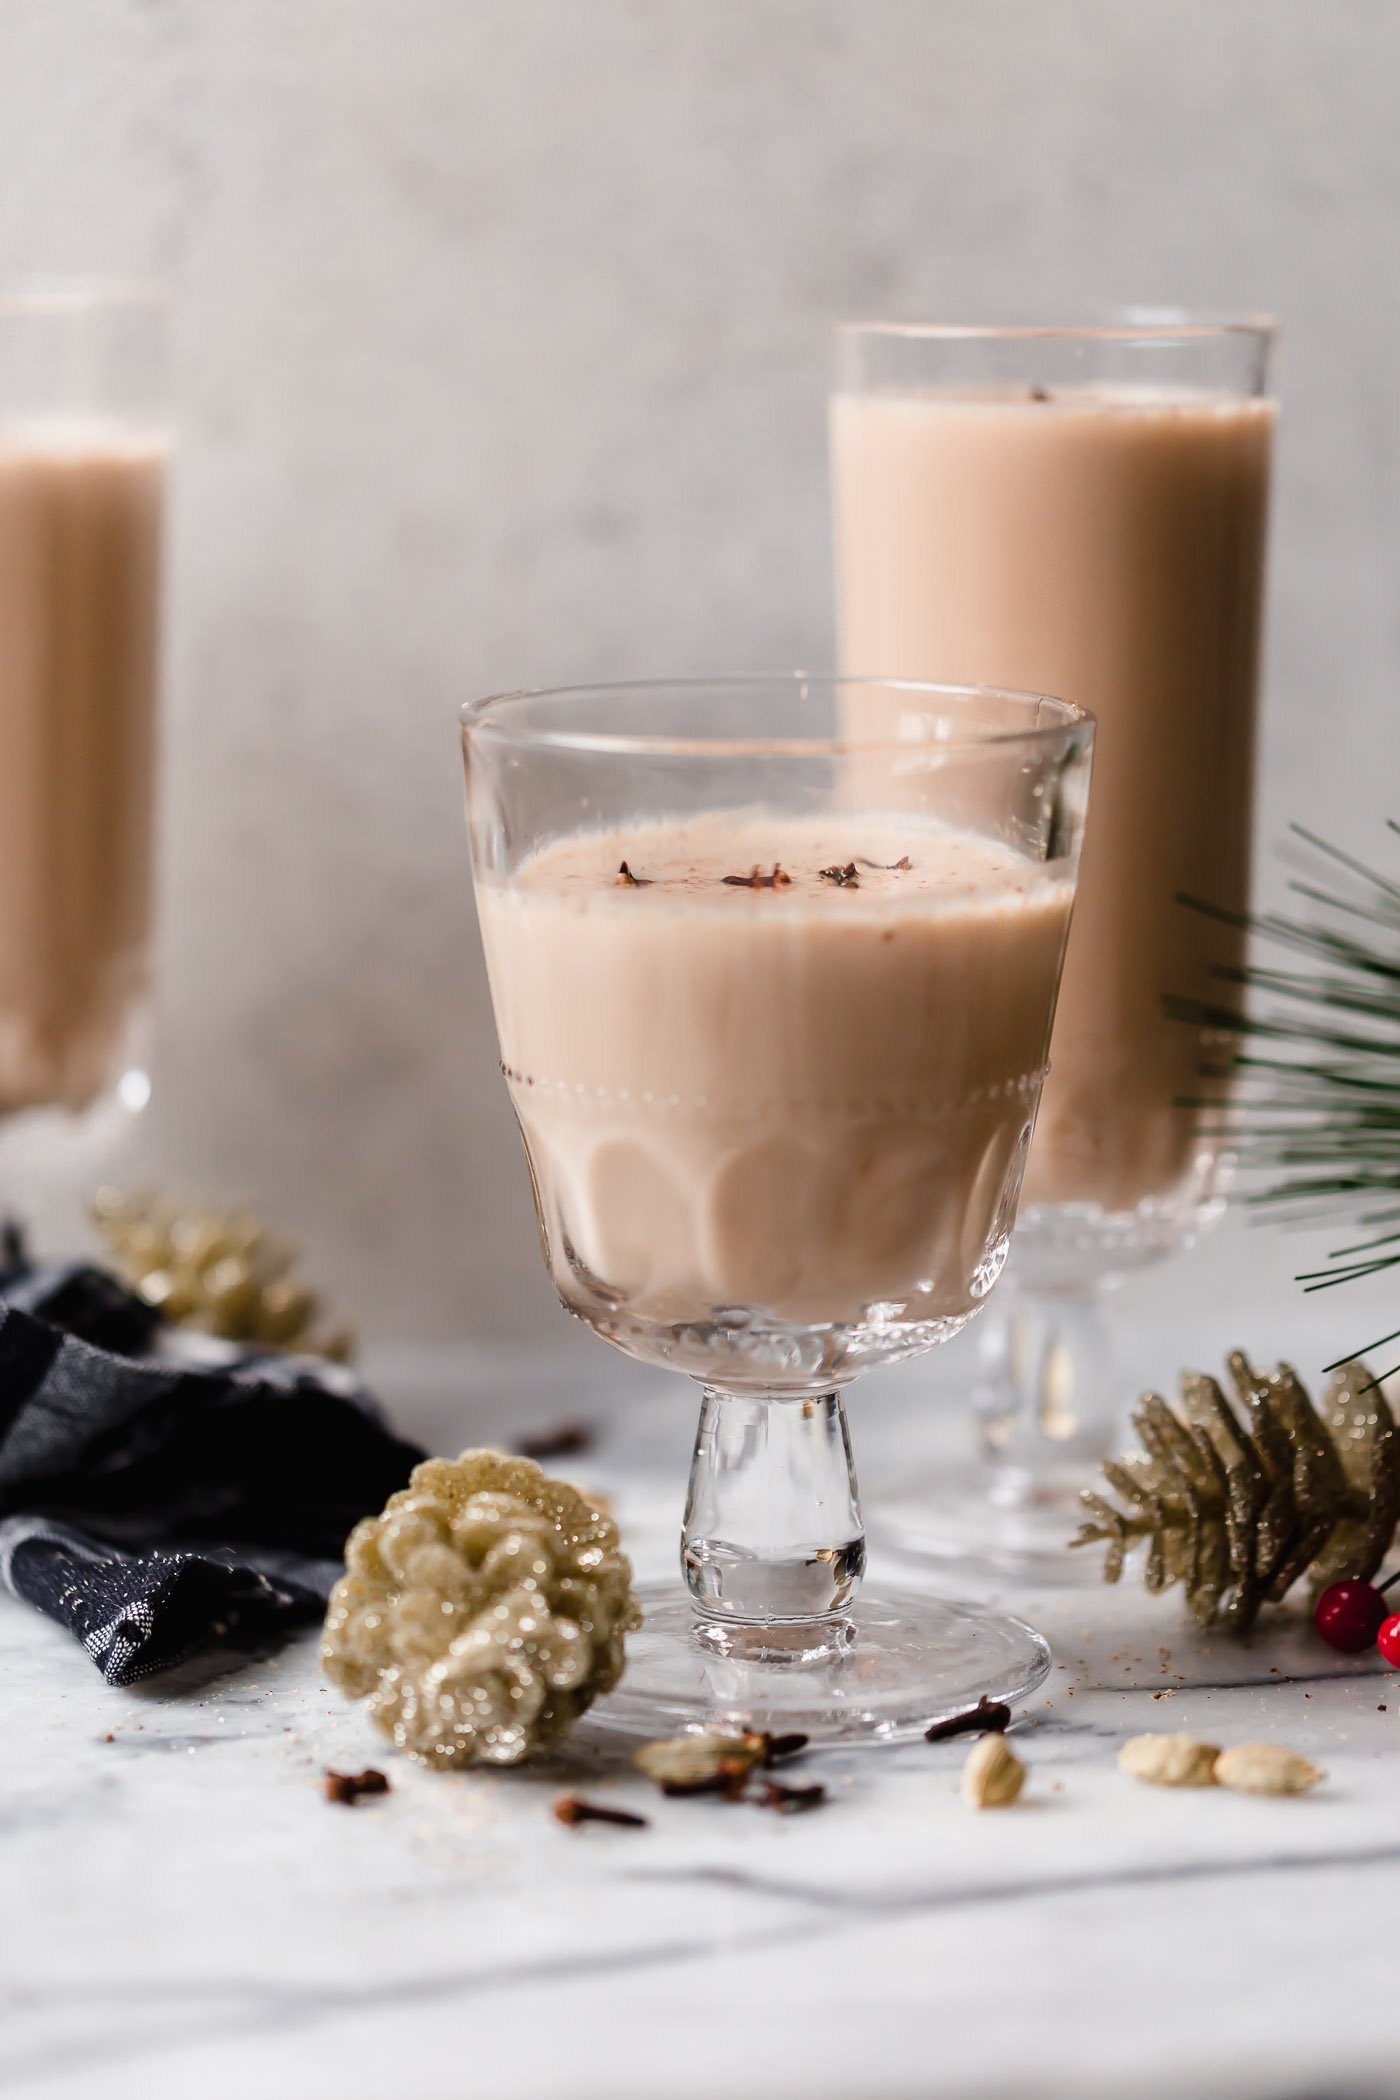 smoky spiked coconut chai tea latte. an easy spiked chai tea recipe! a coconut chai tea latte, lightly sweetened with maple syrup & spiked with mezcal & tequila. an easy & cozy boozy chai tea that’s perfect to warm up on a cold winter night during the holiday season. #playswellwithbutter #spikedchaitea #spikedchailatte #spikedchai #chaicocktail #coconutchai #easycocktailrecipes #fallcocktailrecipes #wintercocktailrecipes #holidaycocktailrecipes #christmascocktailrecipes #mezcalcocktails